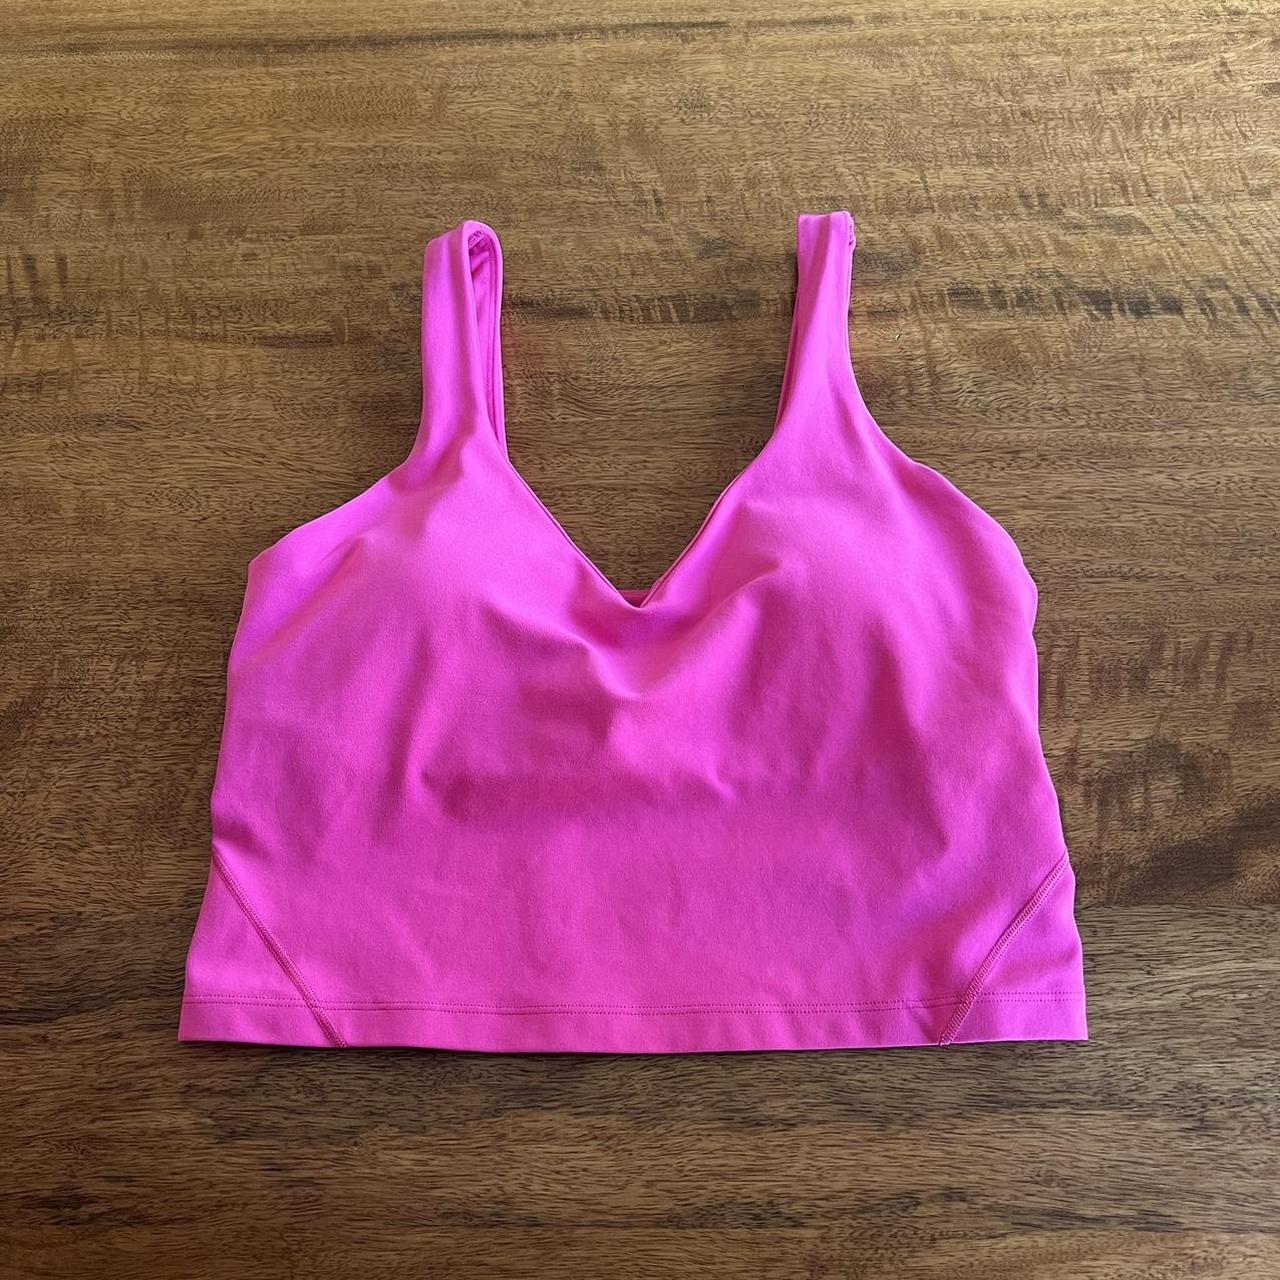 sonic pink lululemon align tank top, size 8, worn once